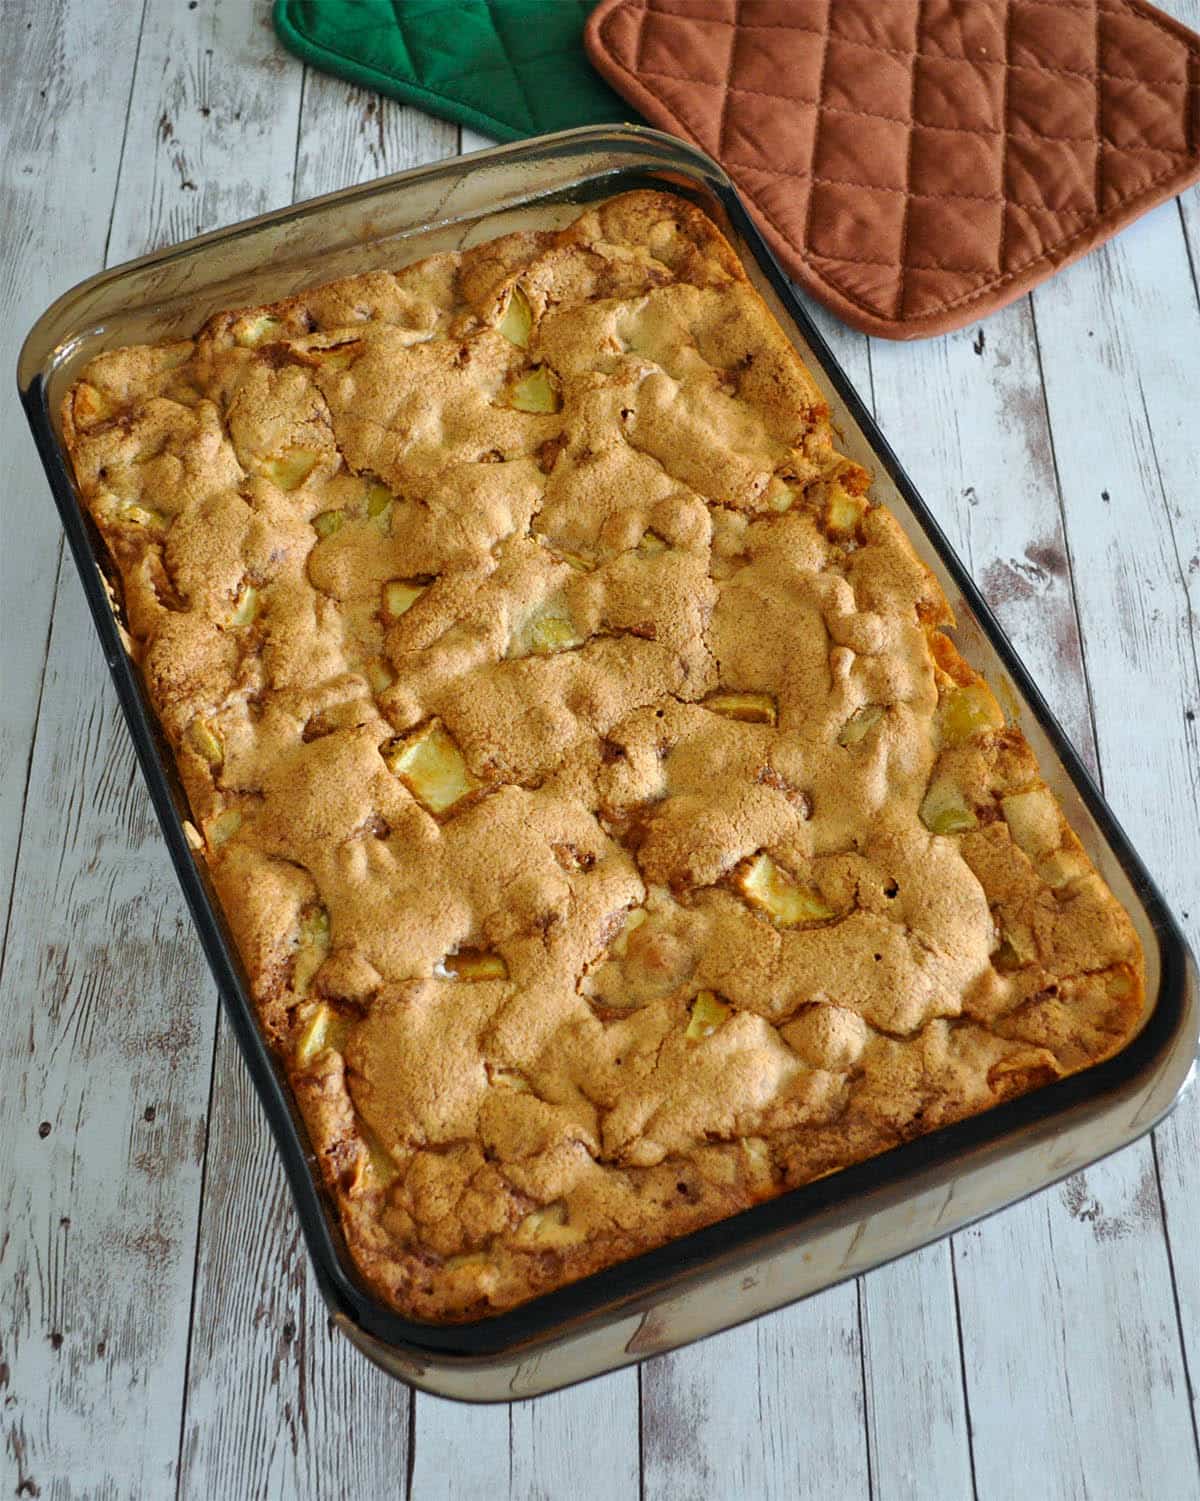 just baked apple cake in a baking dish